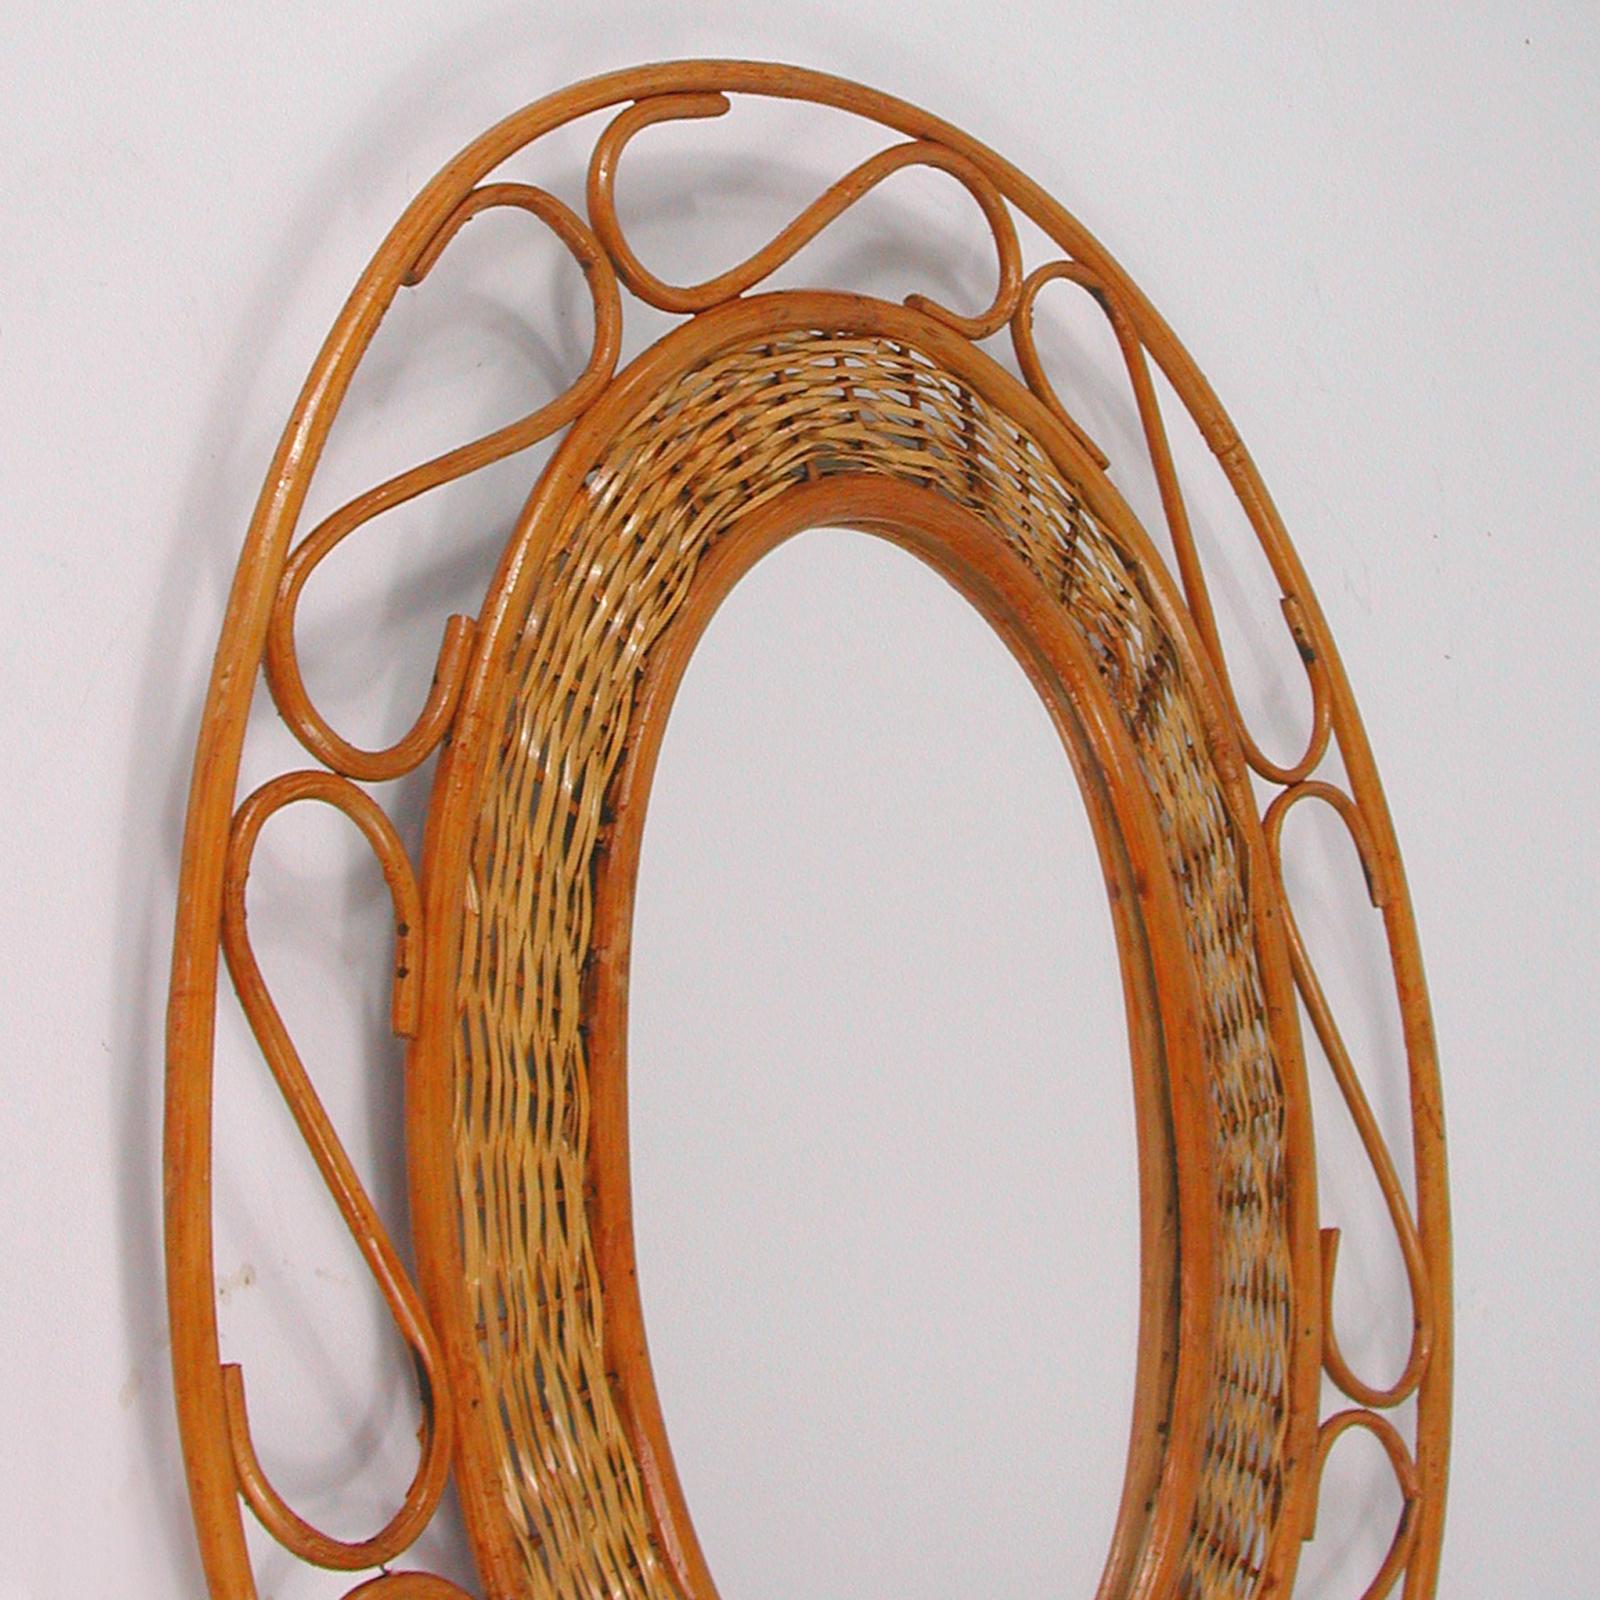 Midcentury Jean Royère Style French Riviera Rattan and Wicker Mirror, 1950s For Sale 3